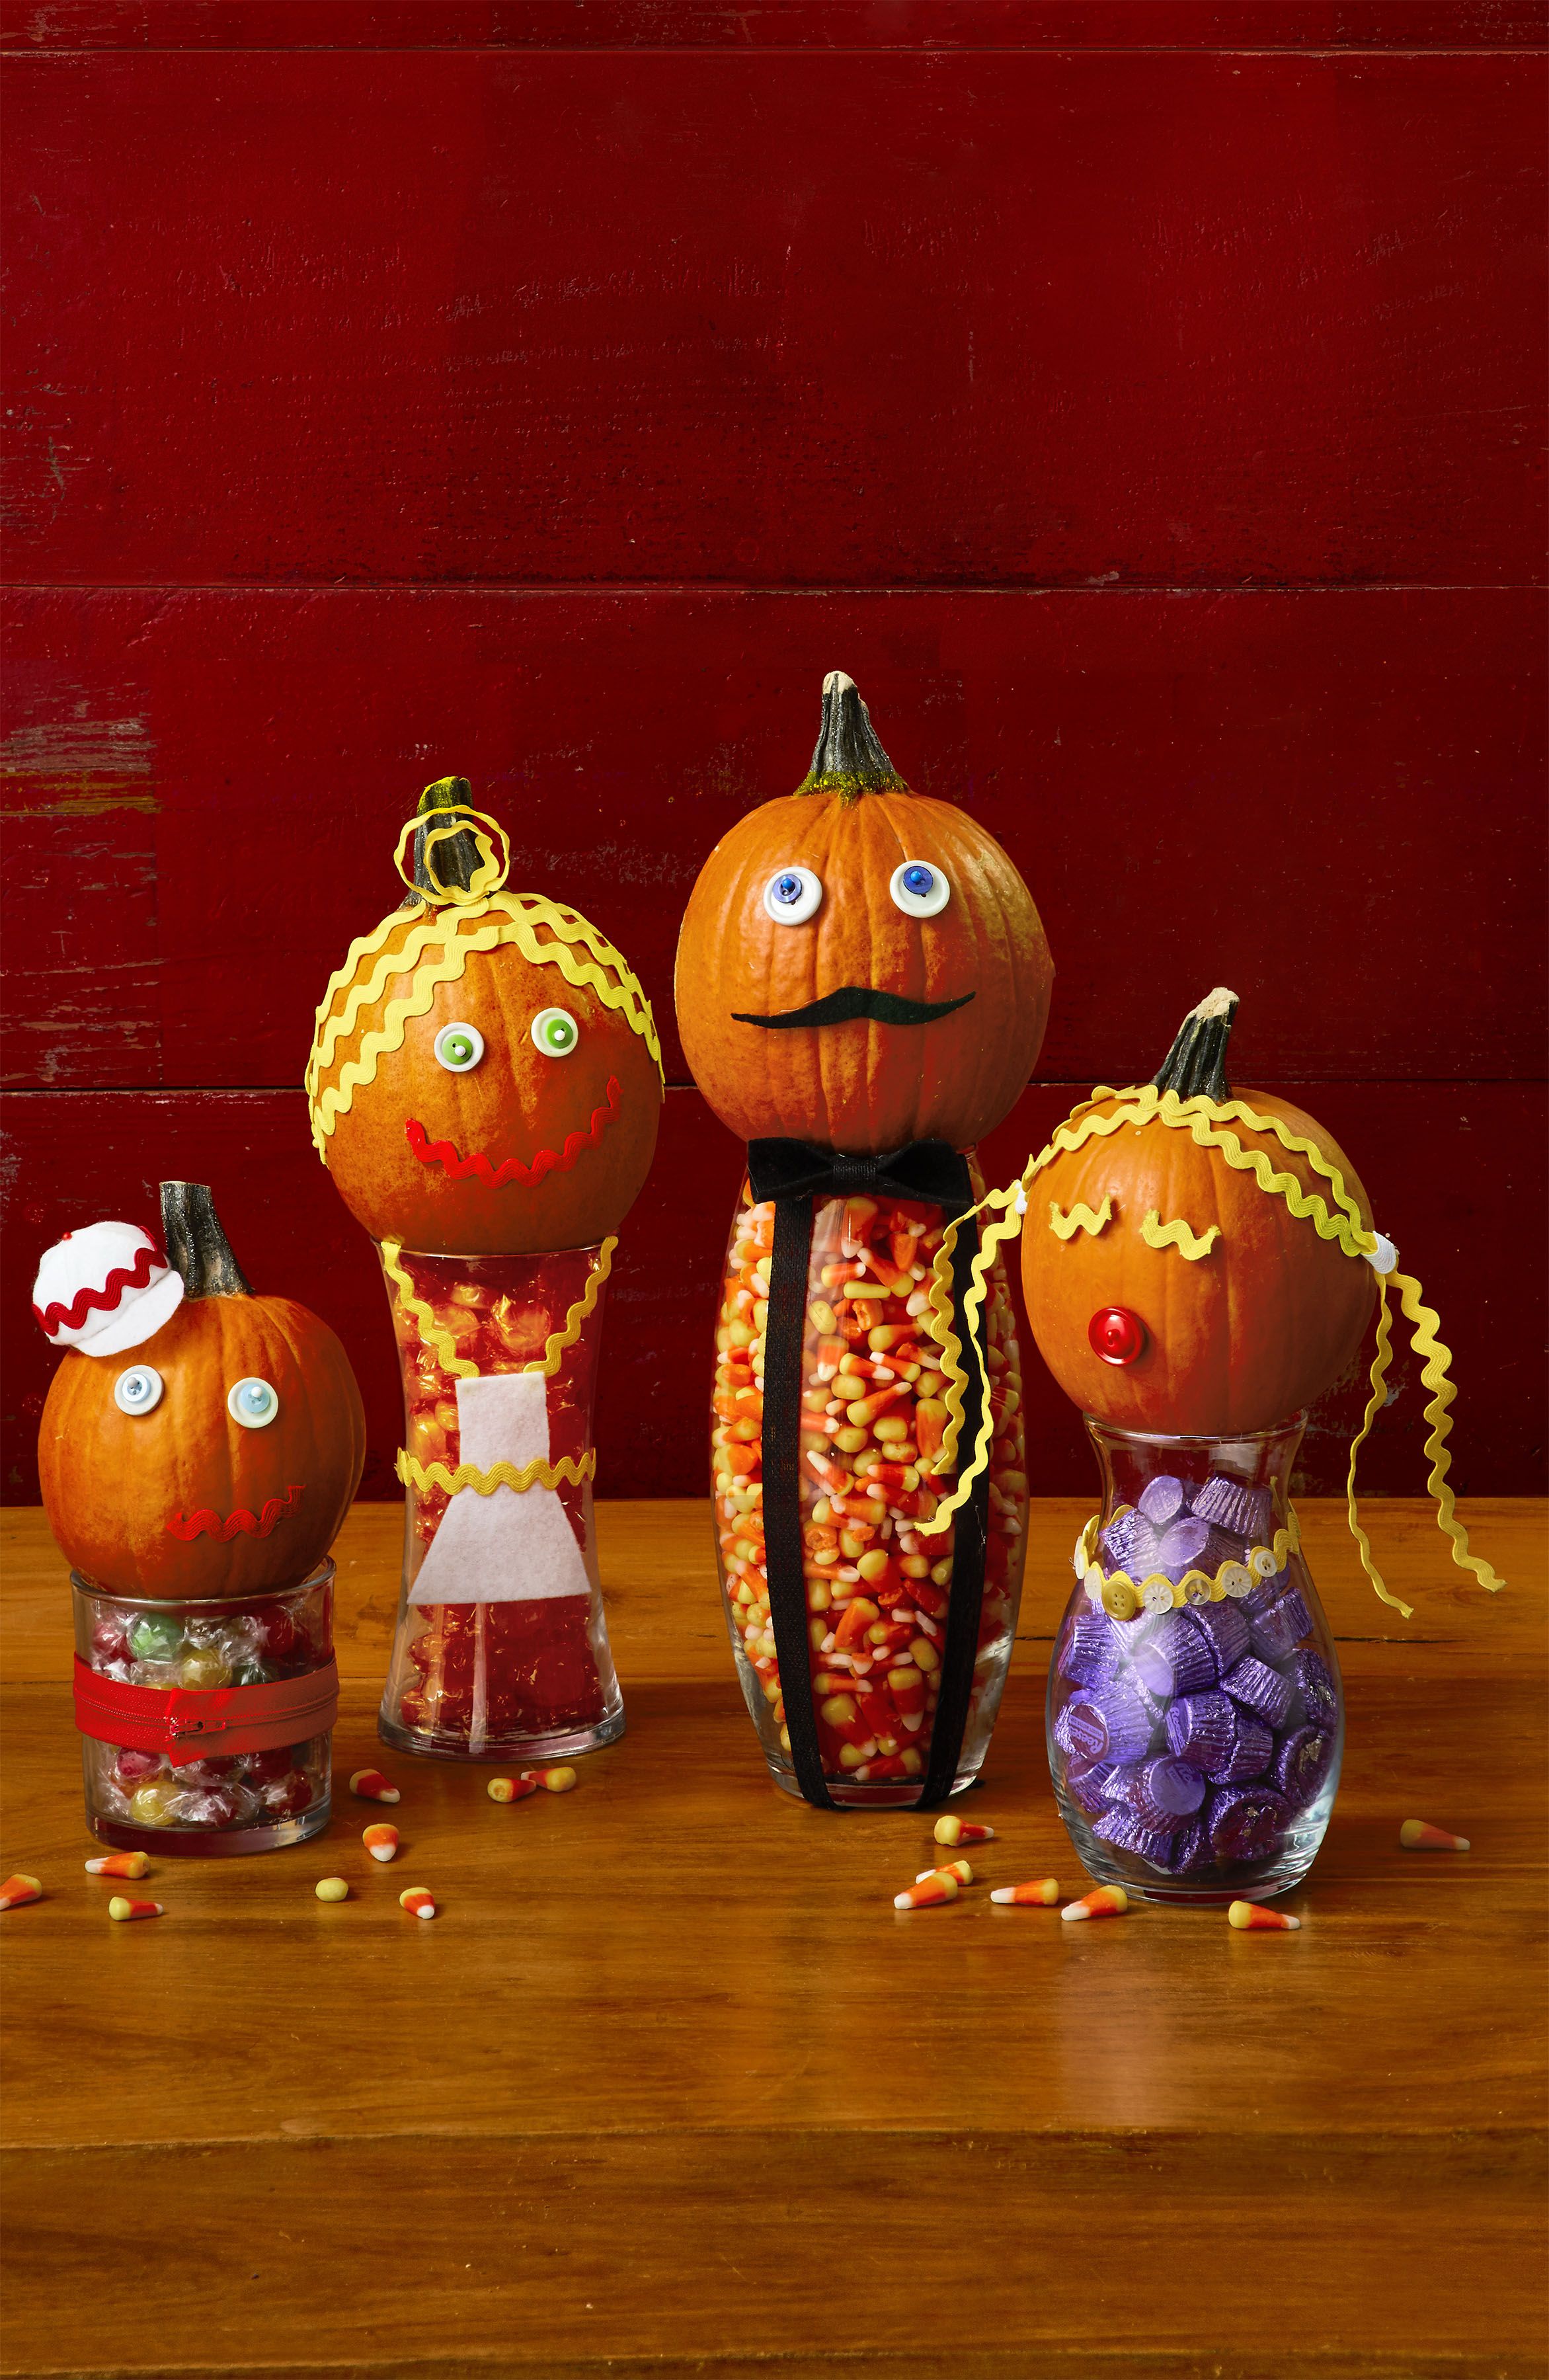 creative pumpkin decorating ideas without carving